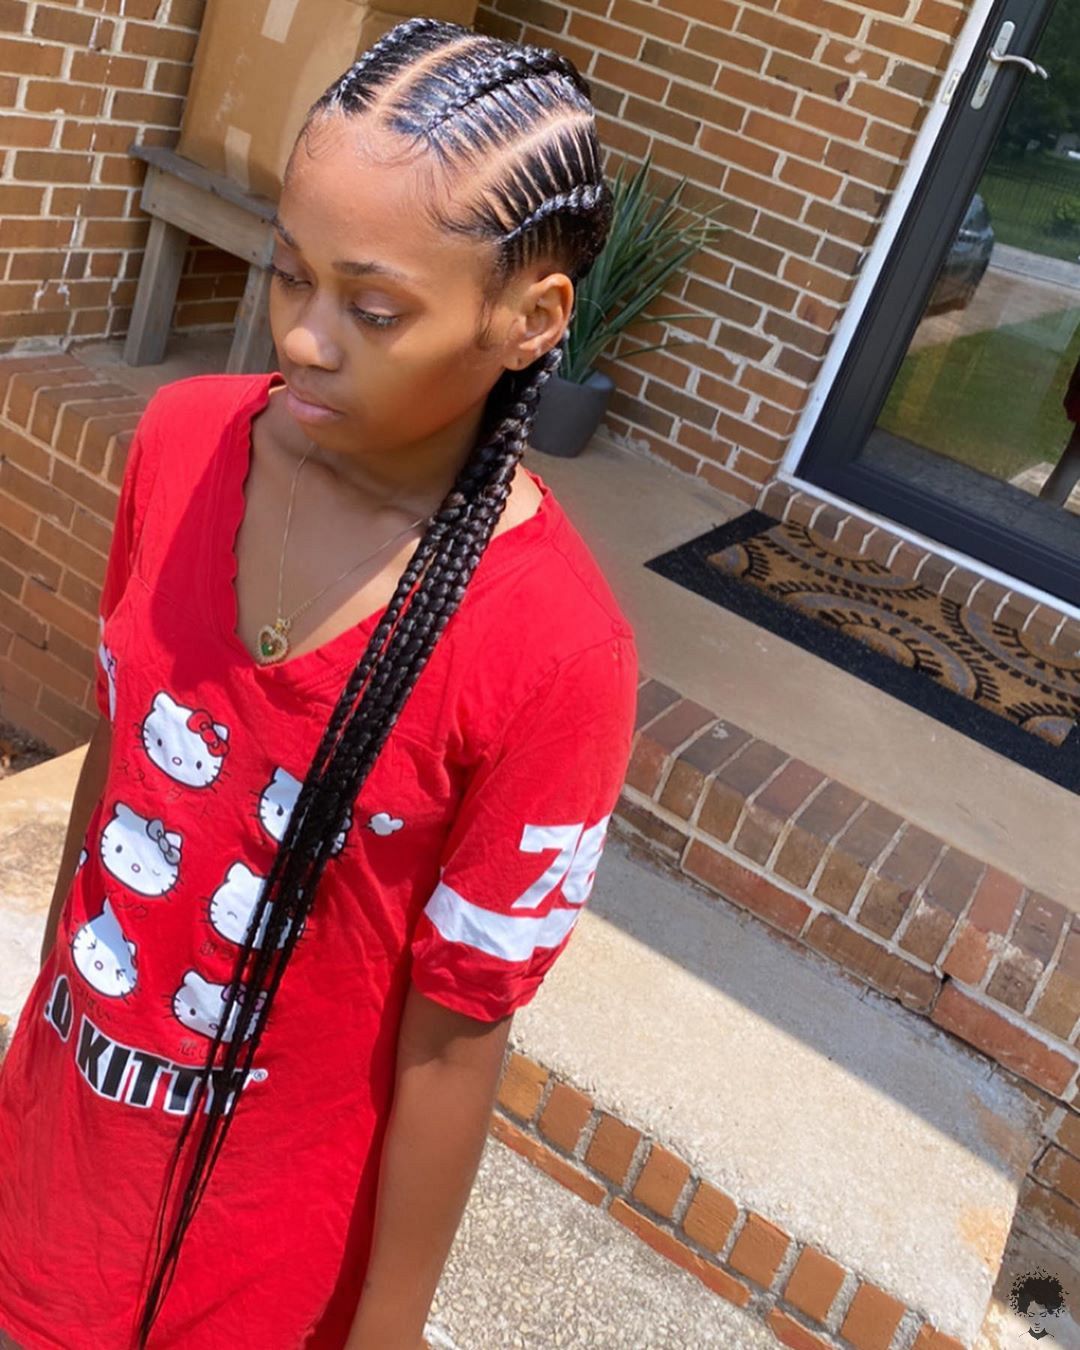 Best Ghana Braid Hairstyles For 2021 Amazing Ghana Braids To Try Out This Season 011